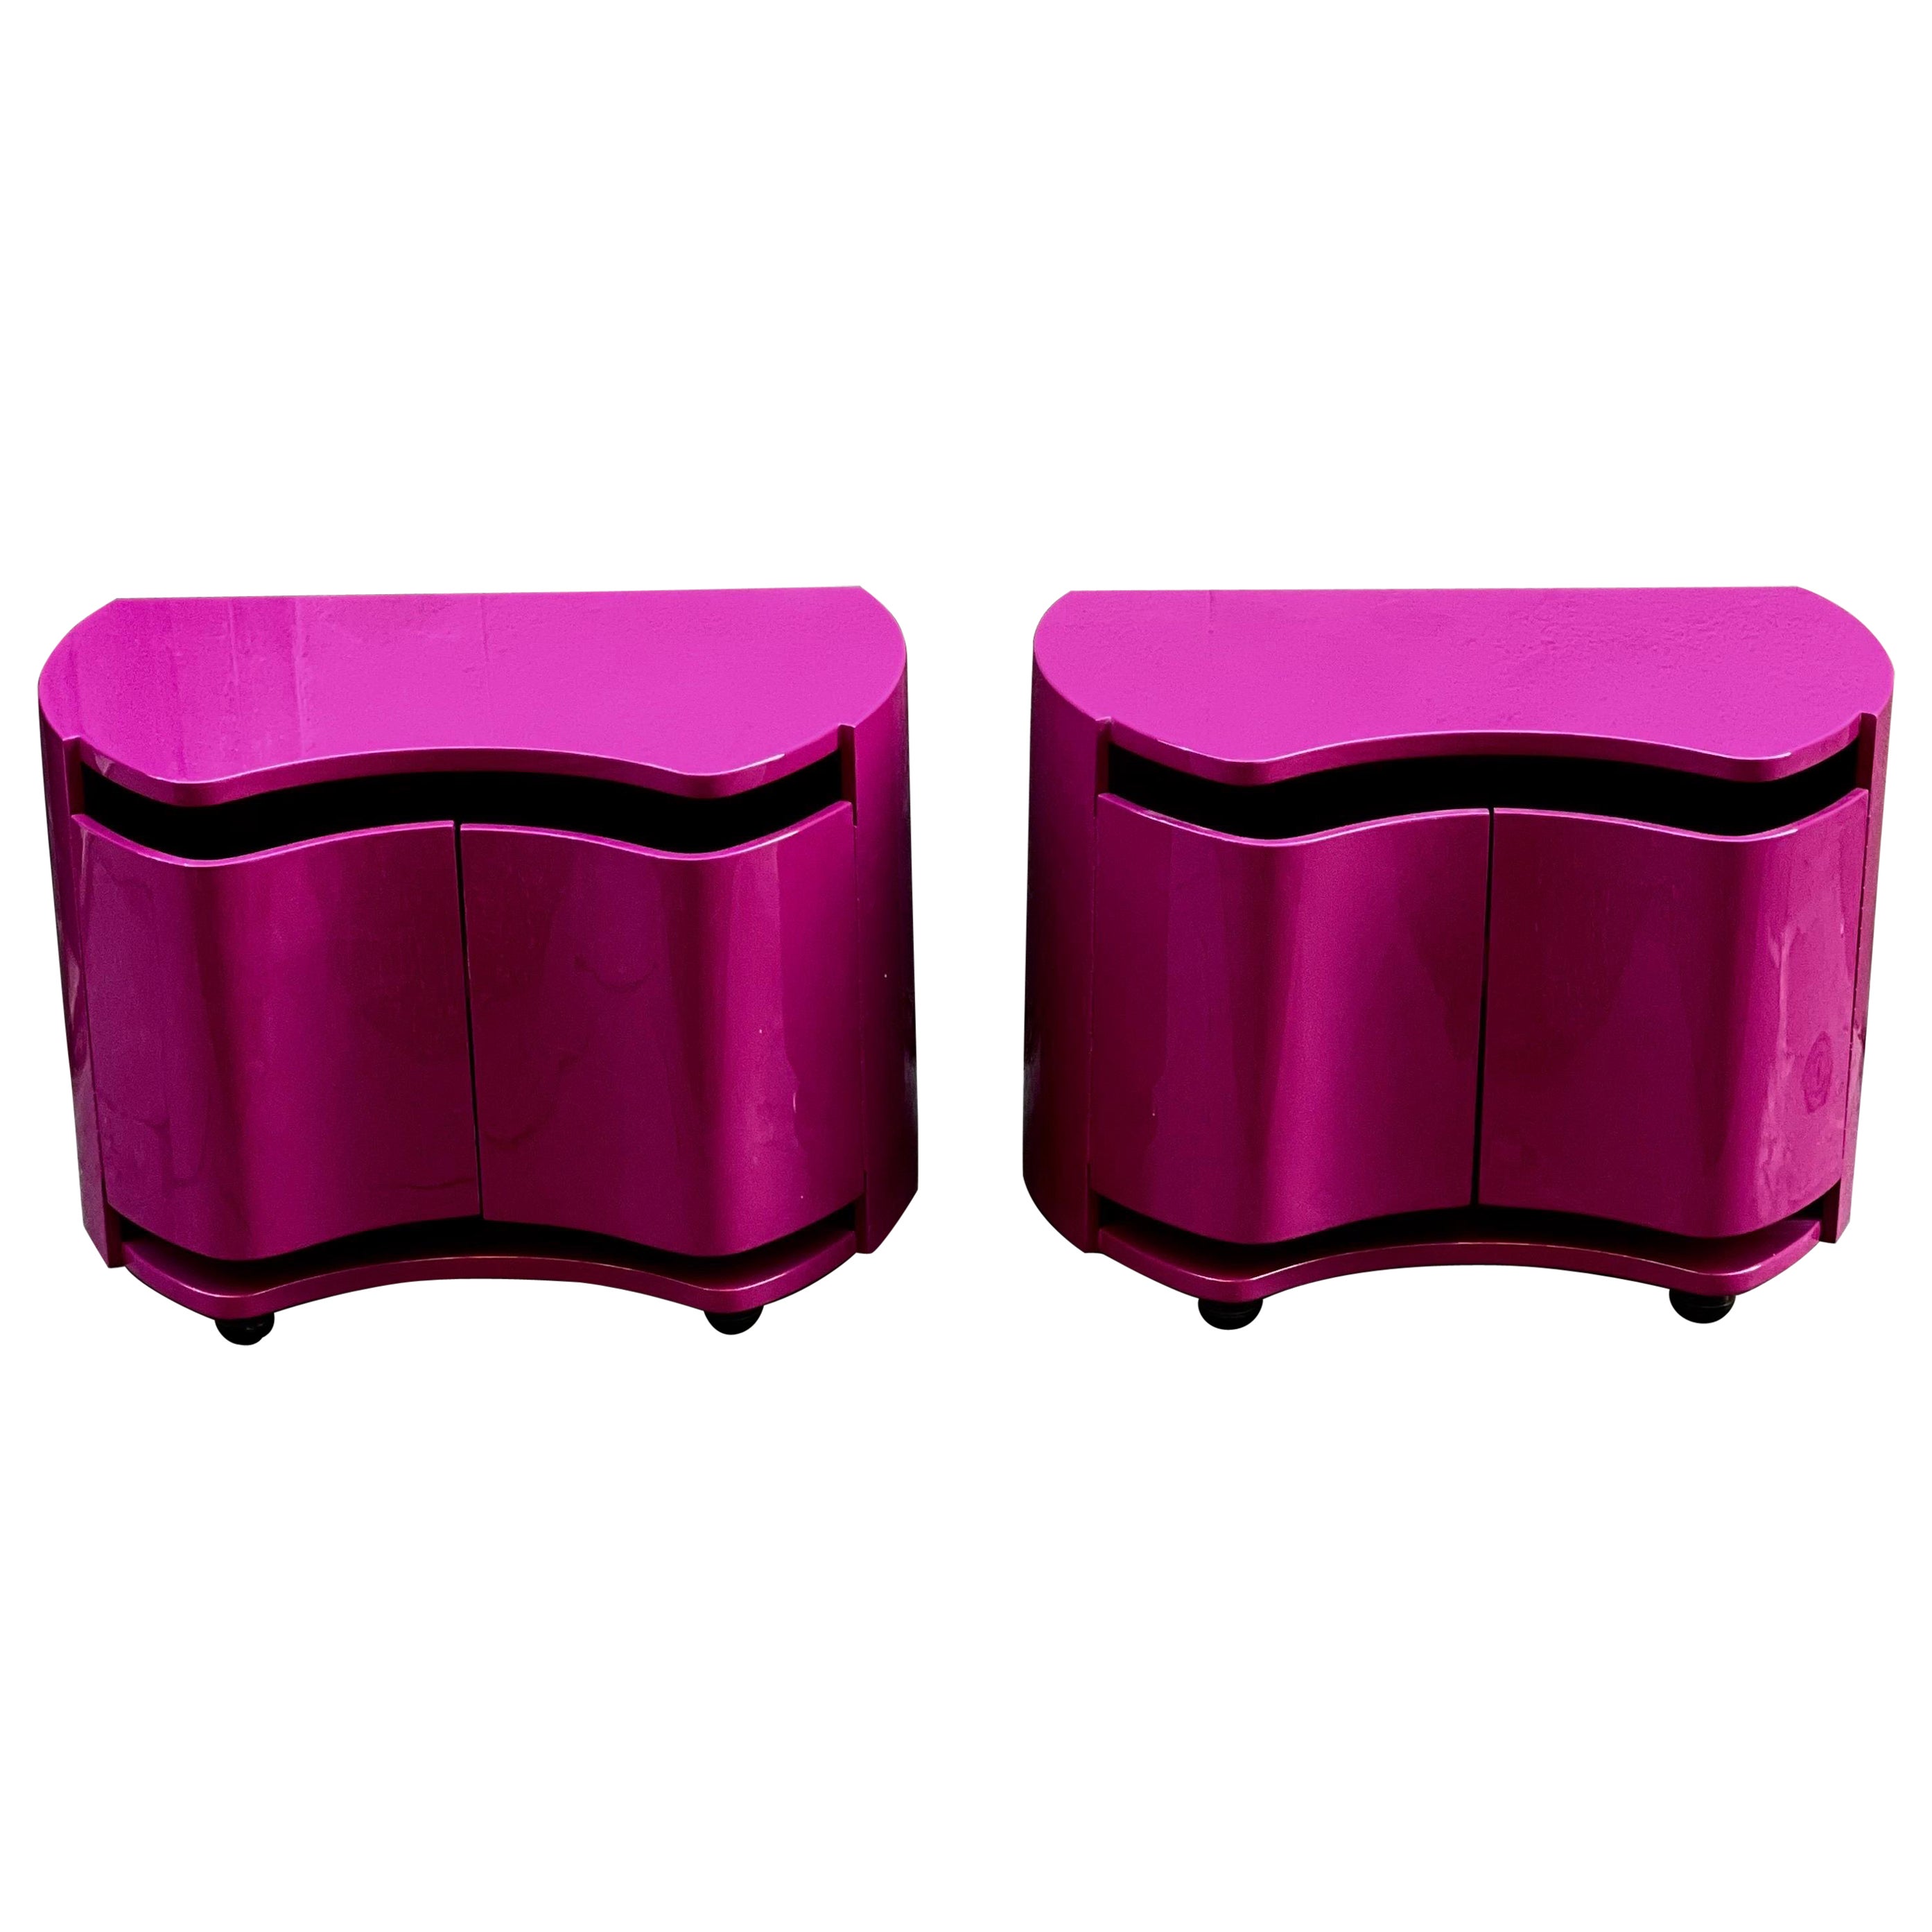 Pair of Cyclamen Colour Lacquered Resin Night Stands by Benatti Italy, 1966